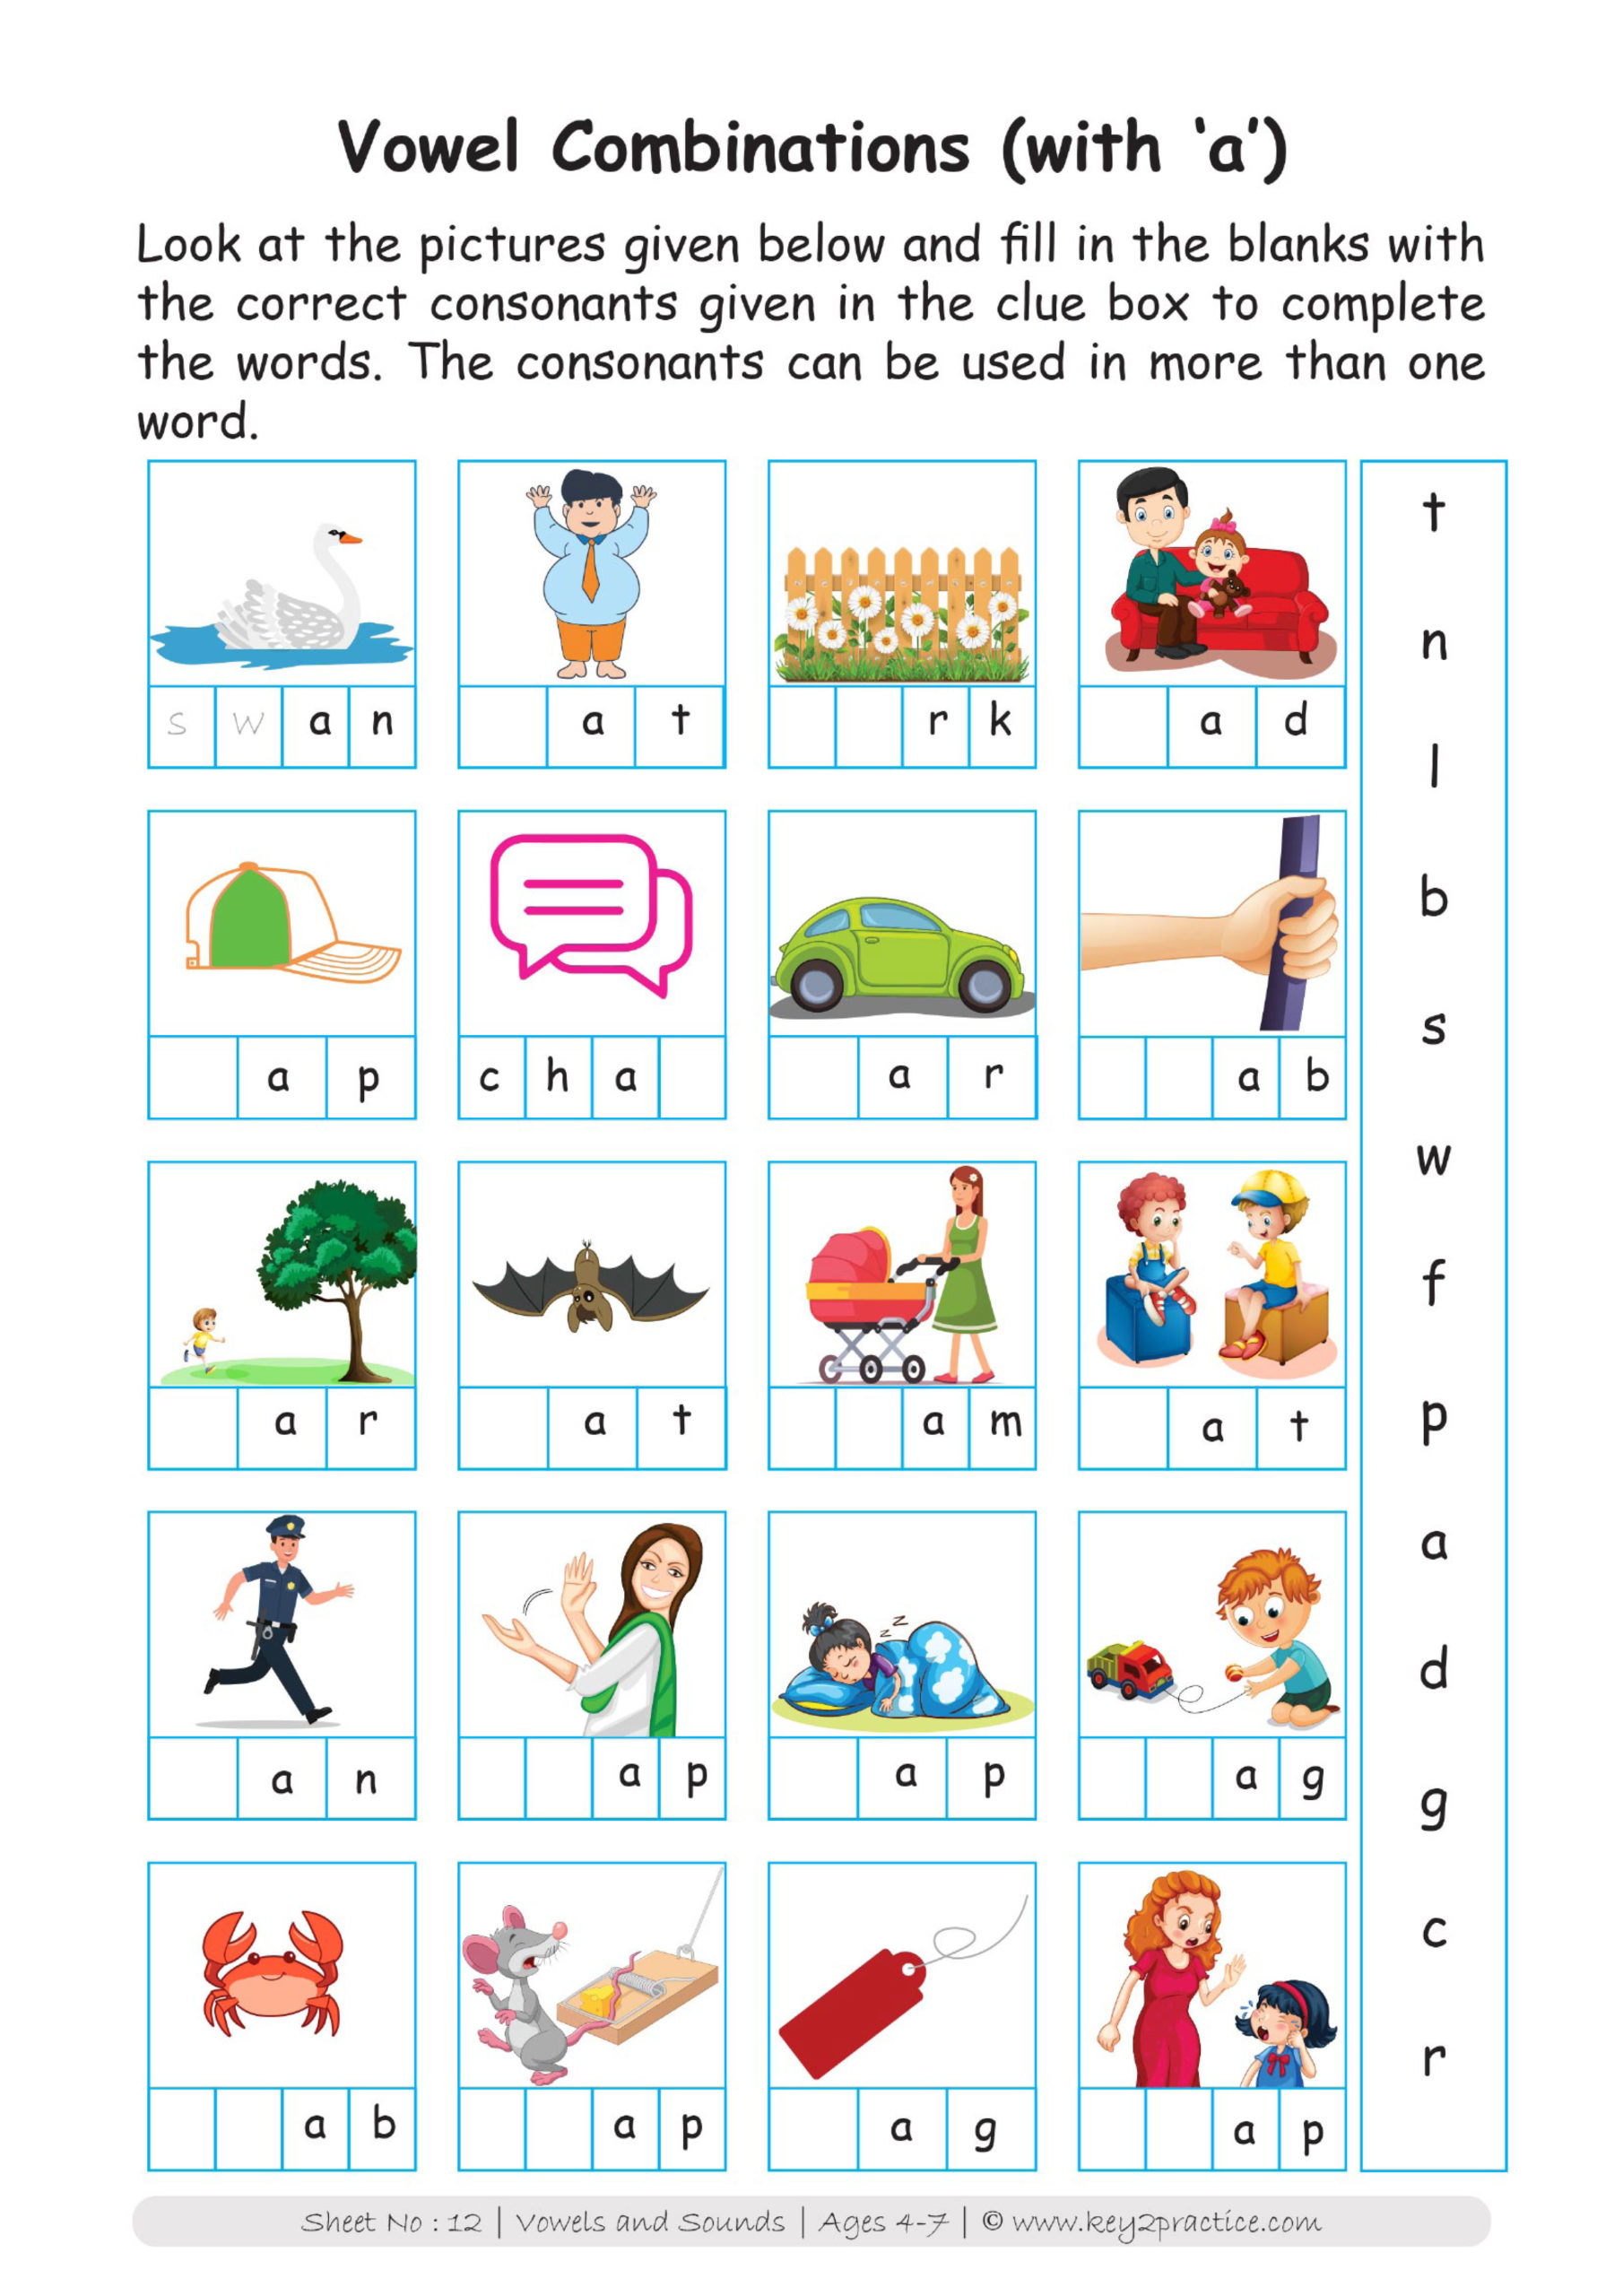 Vowels and Consonants Worksheets I Preprimary classes key2practice